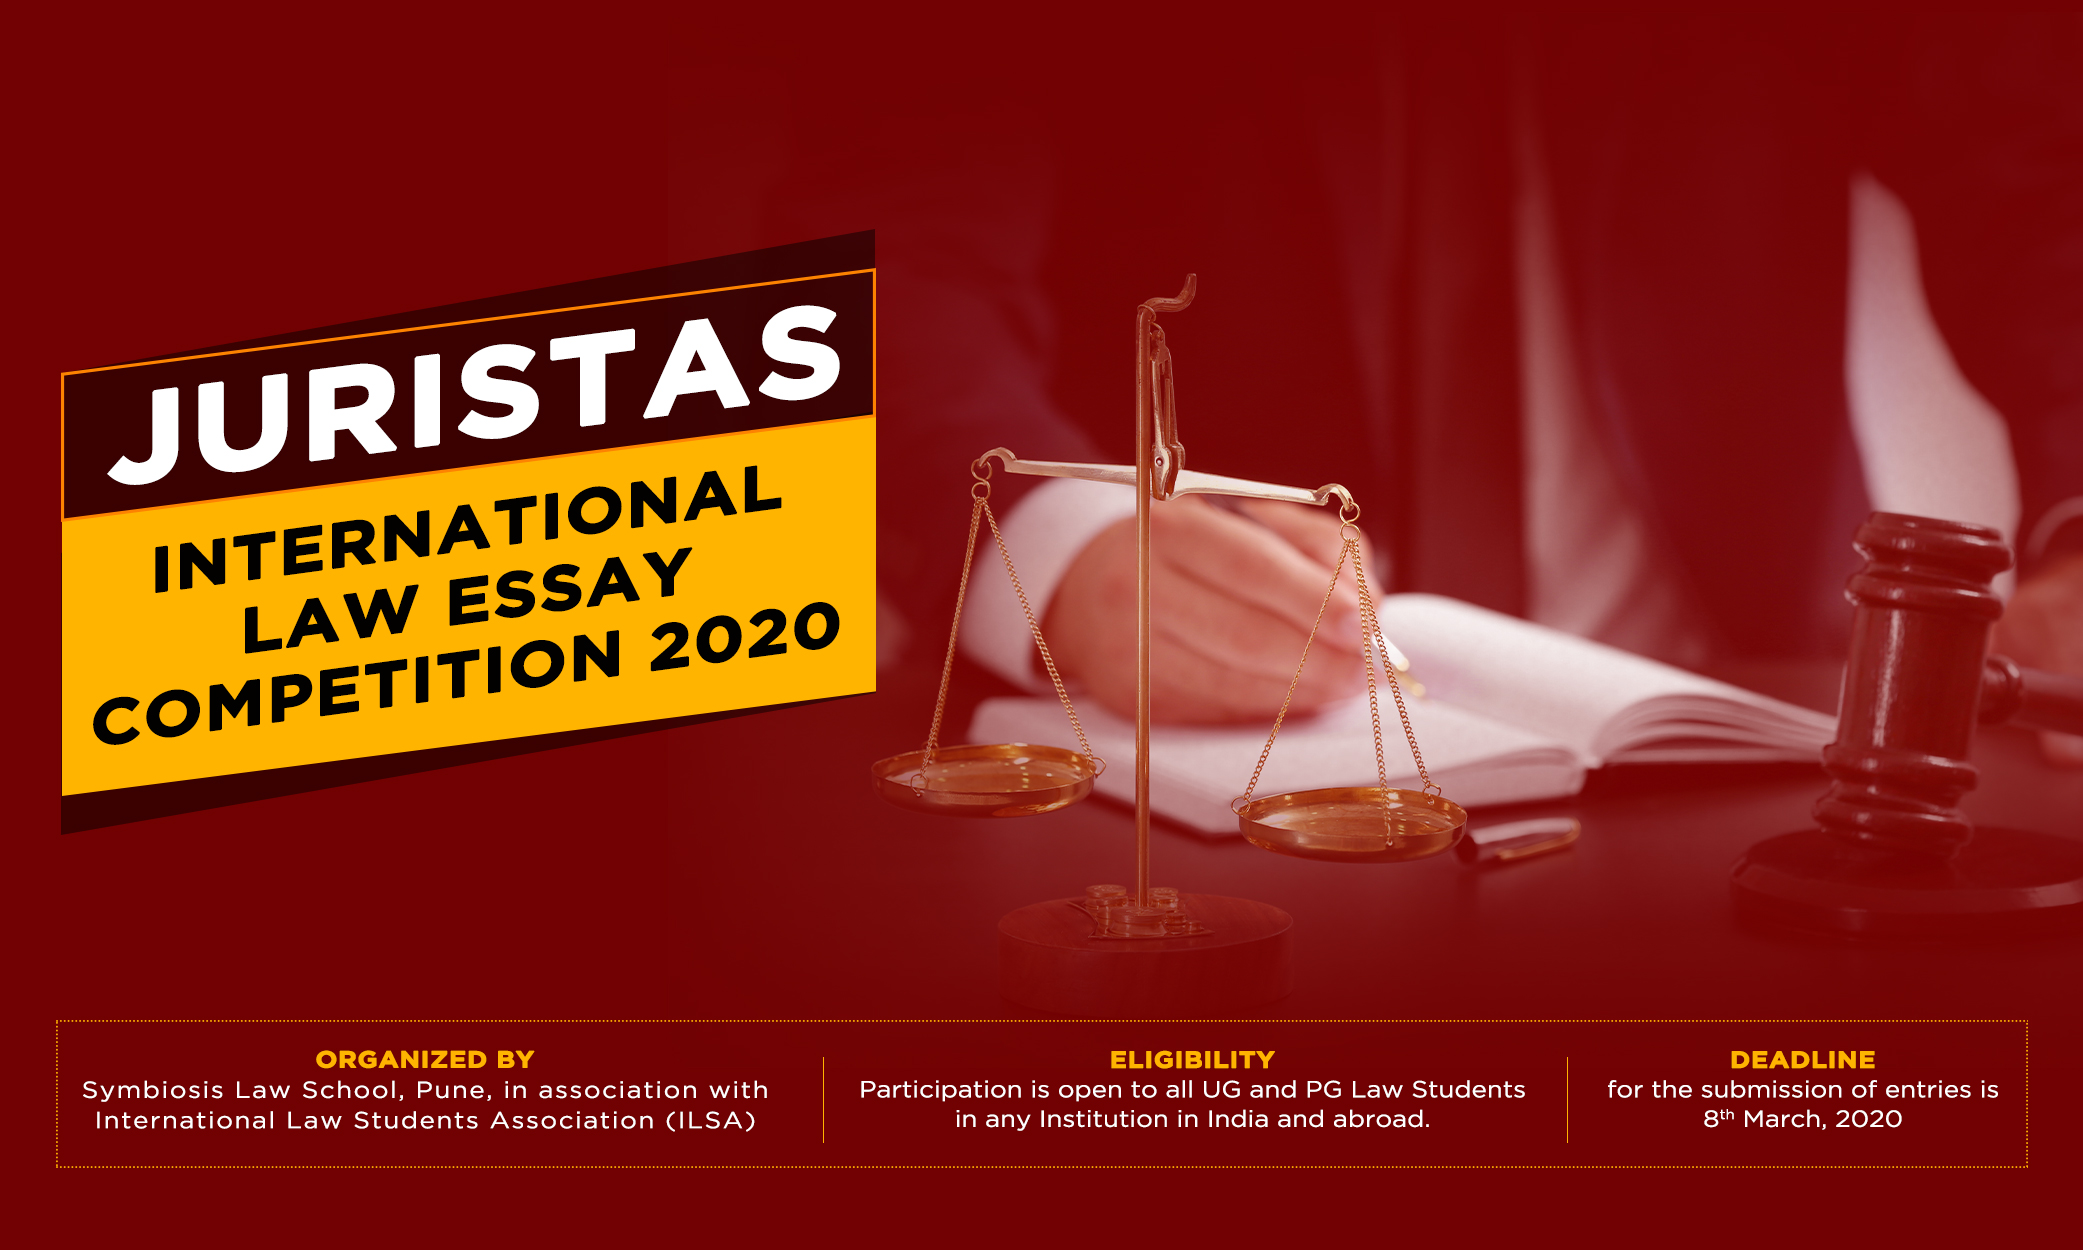 Juristas International Law Essay Competition At Symbiosis Law School, Pune